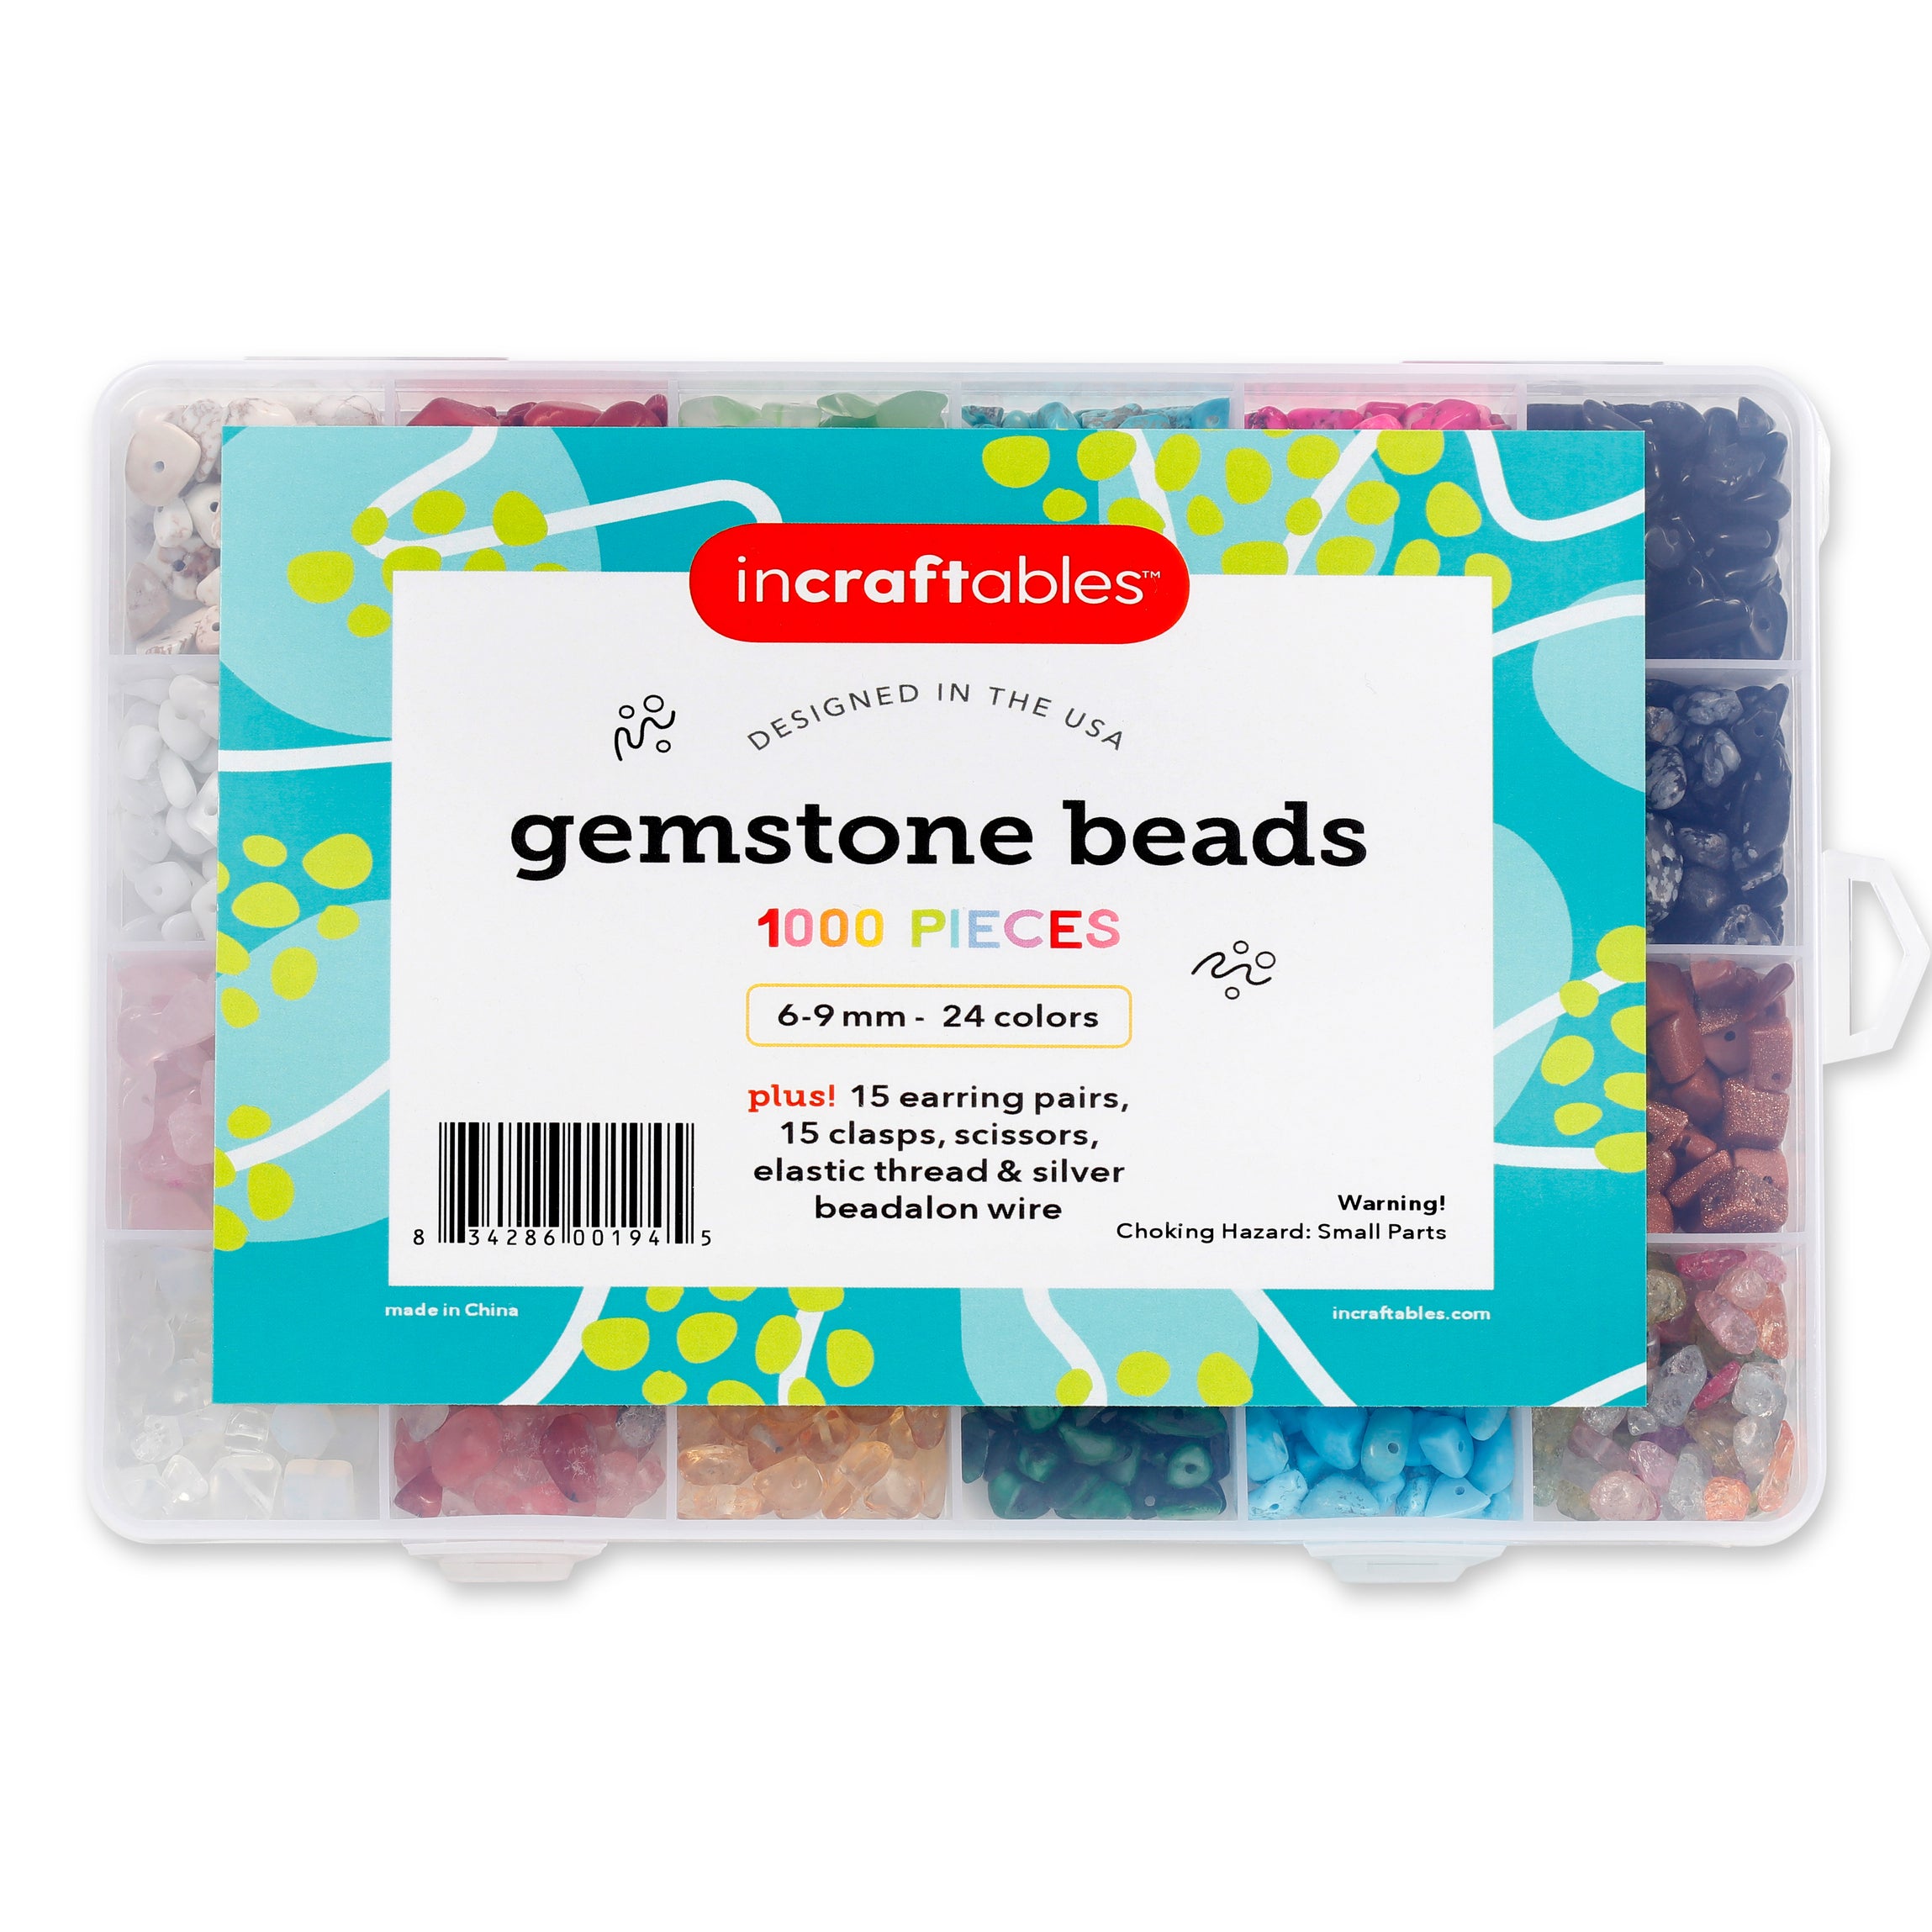 Your Source for Beads Gems Tools Crafts Supplies